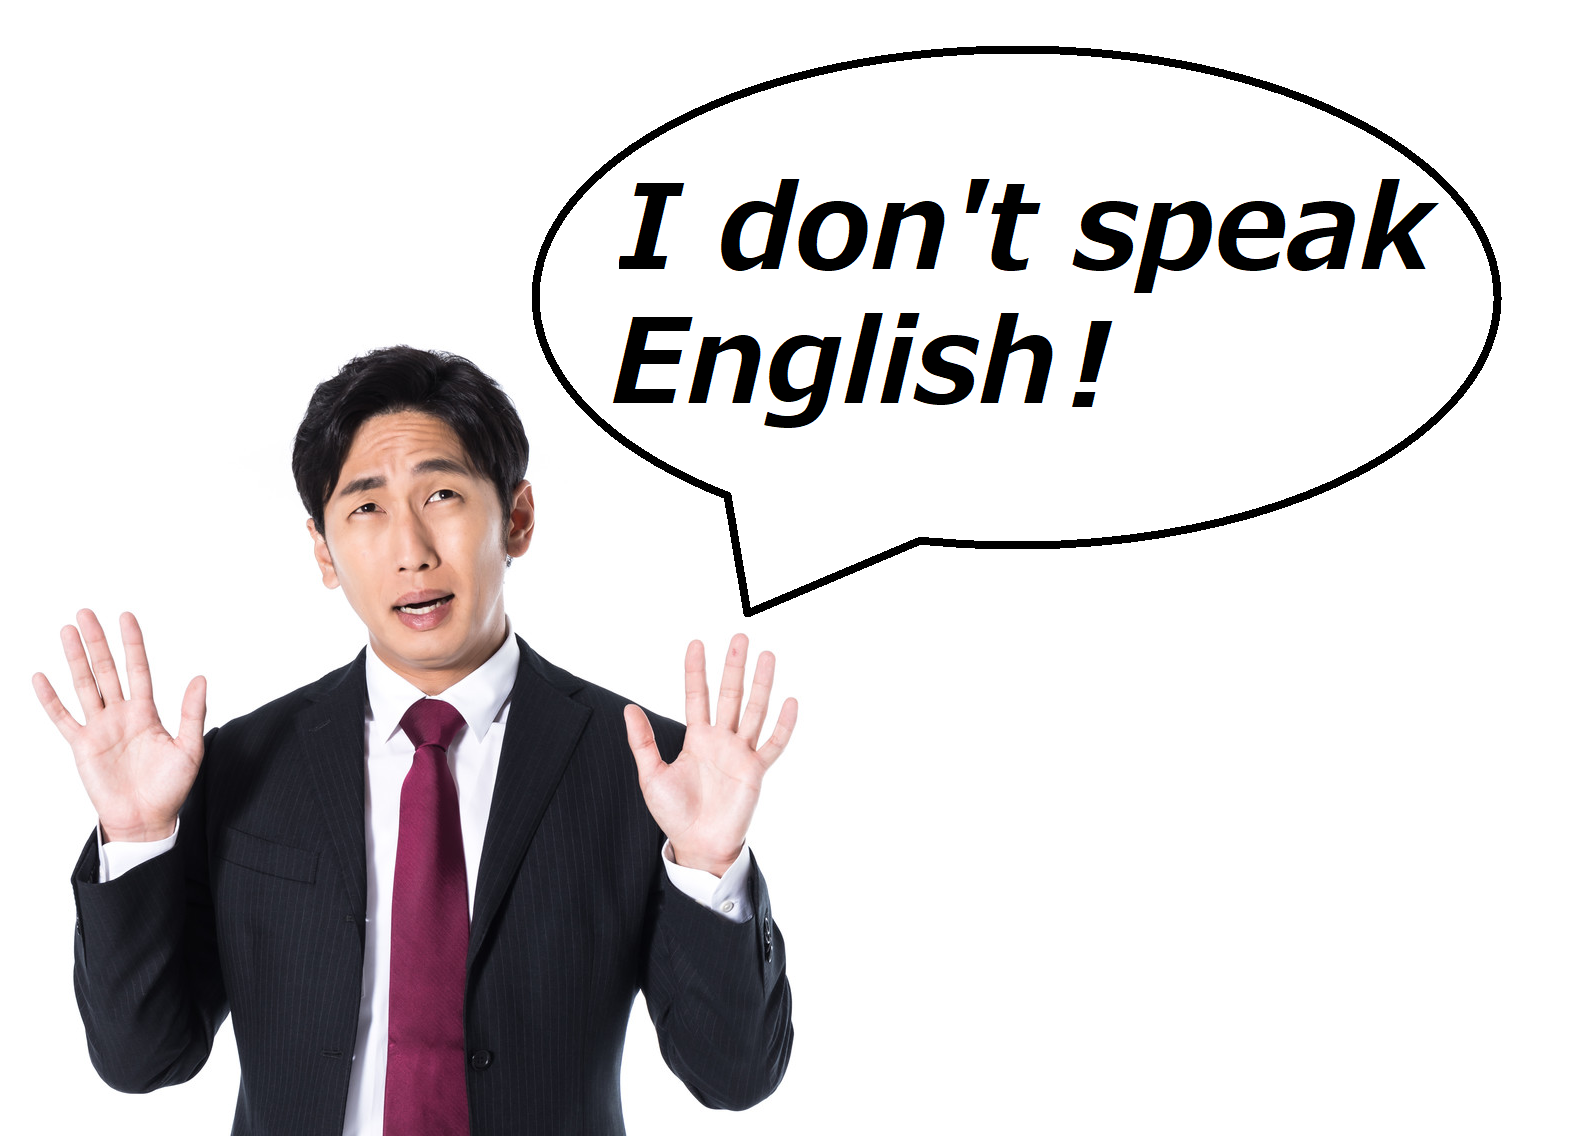 How to respond to Japanese people saying “I don’t speak English” when